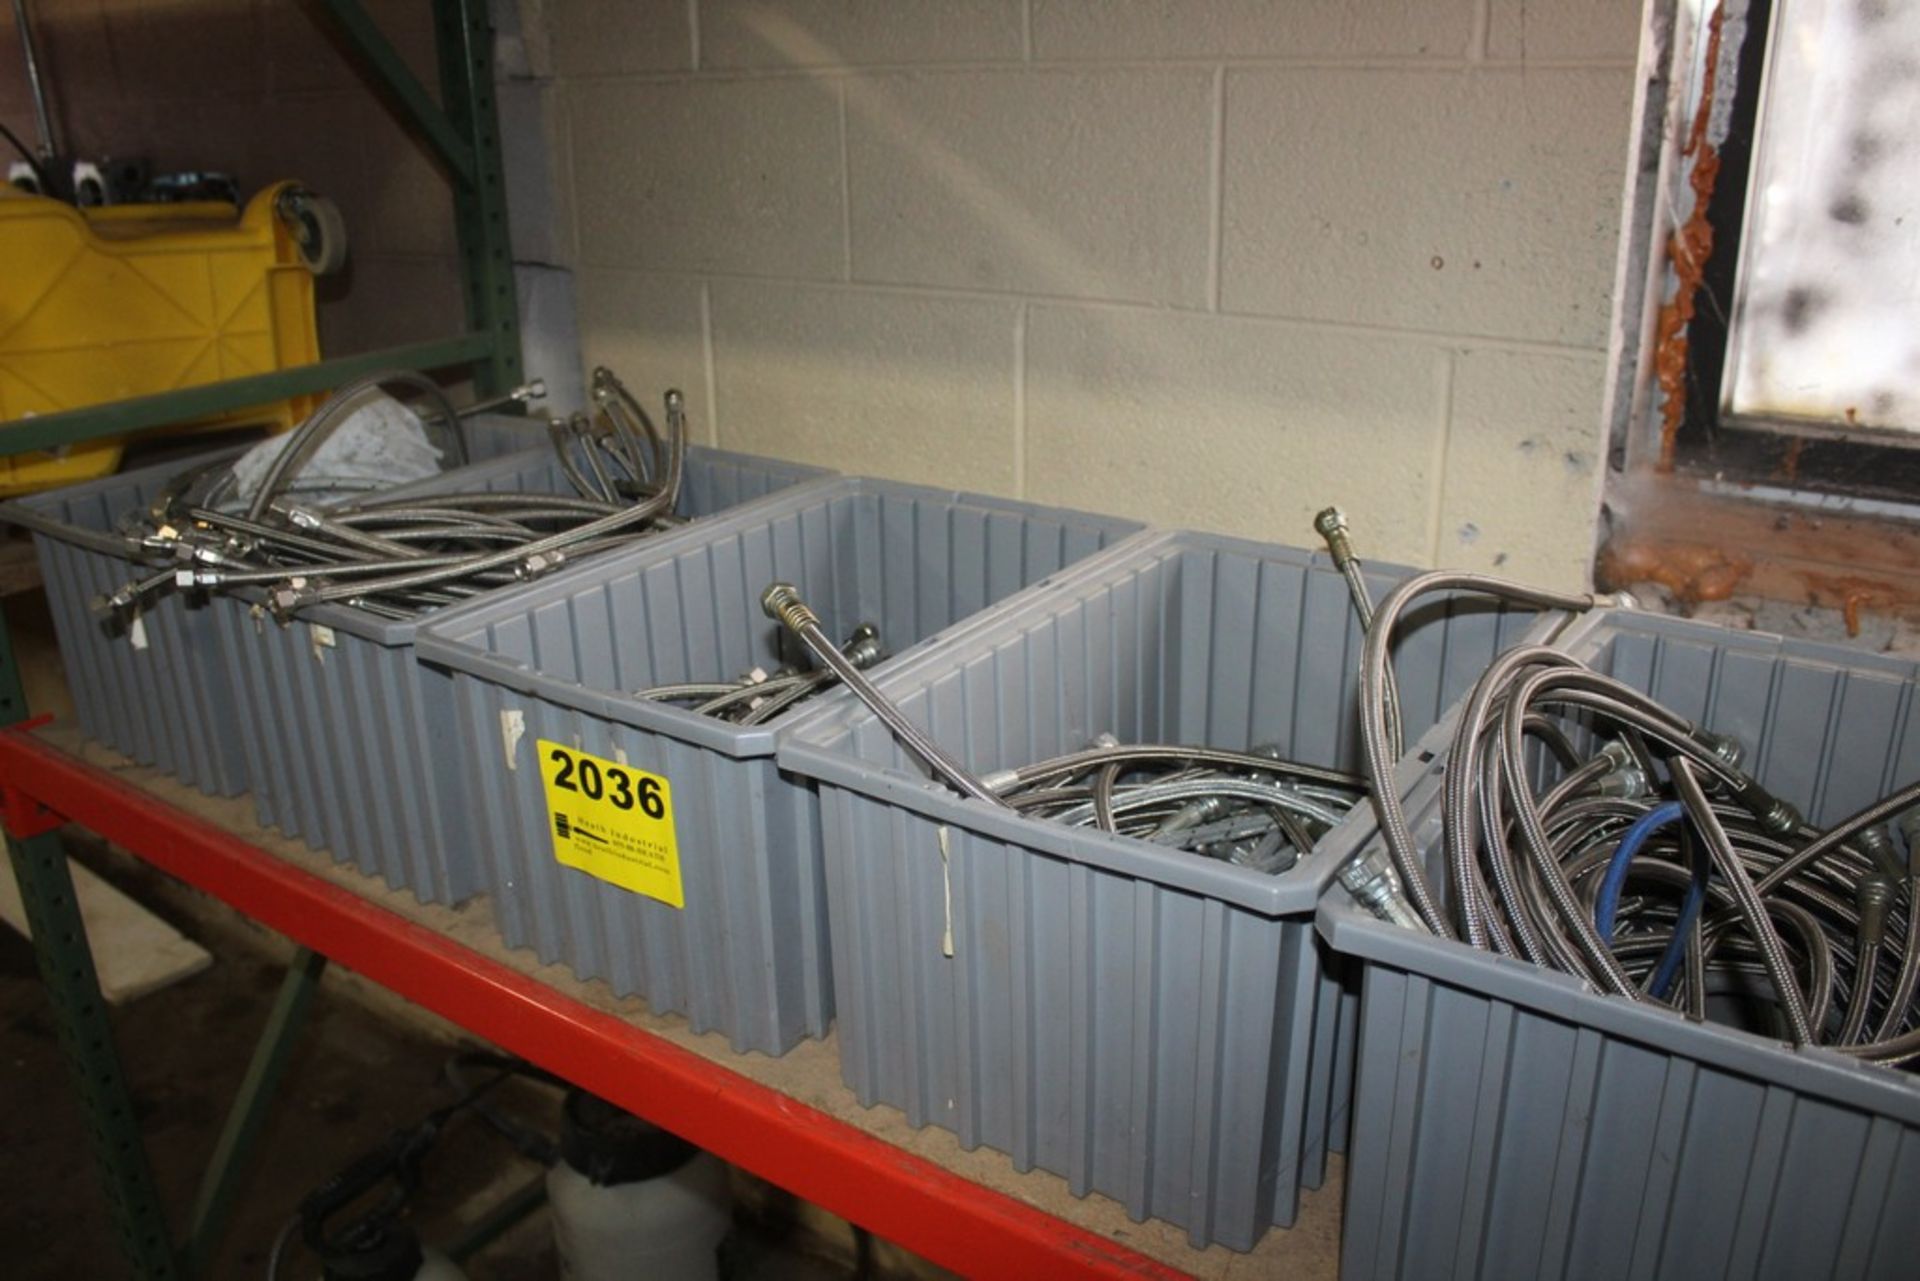 (5) BINS OF BRAIDED HOSE, APPEARS STAINLESS